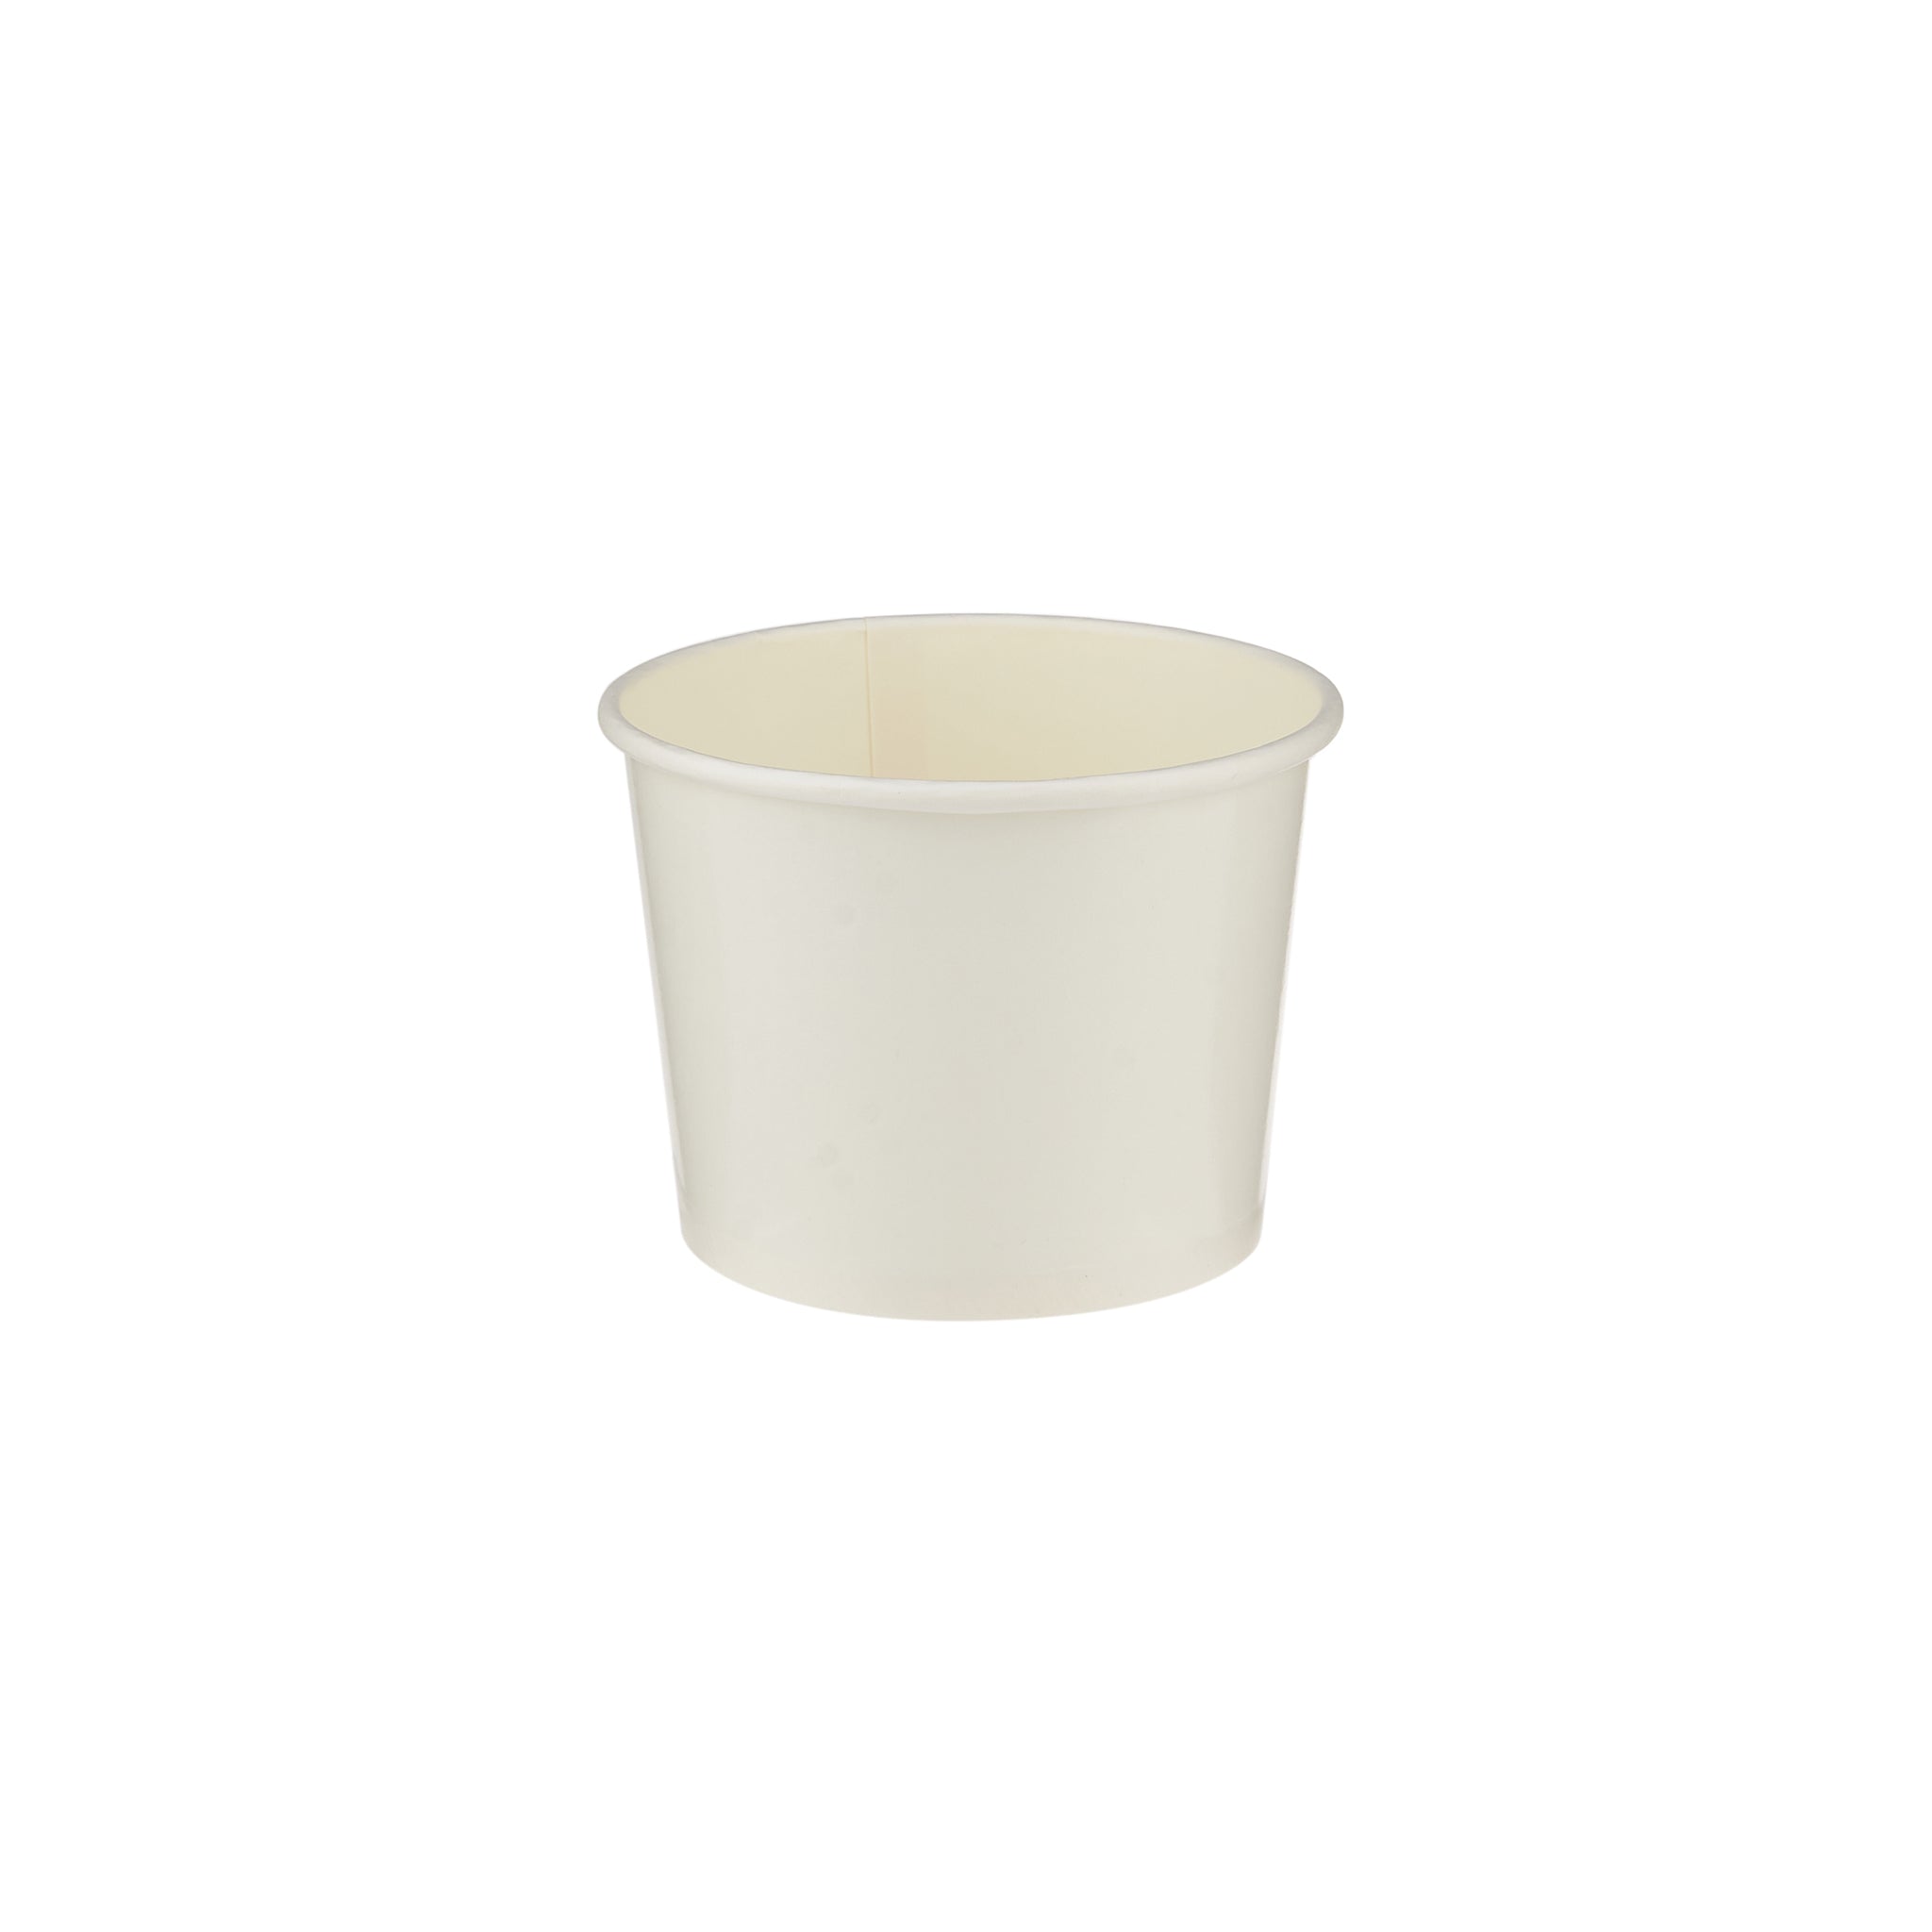 1200 Pieces 400 ml White Paper Soup Bowl - Hotpack Global